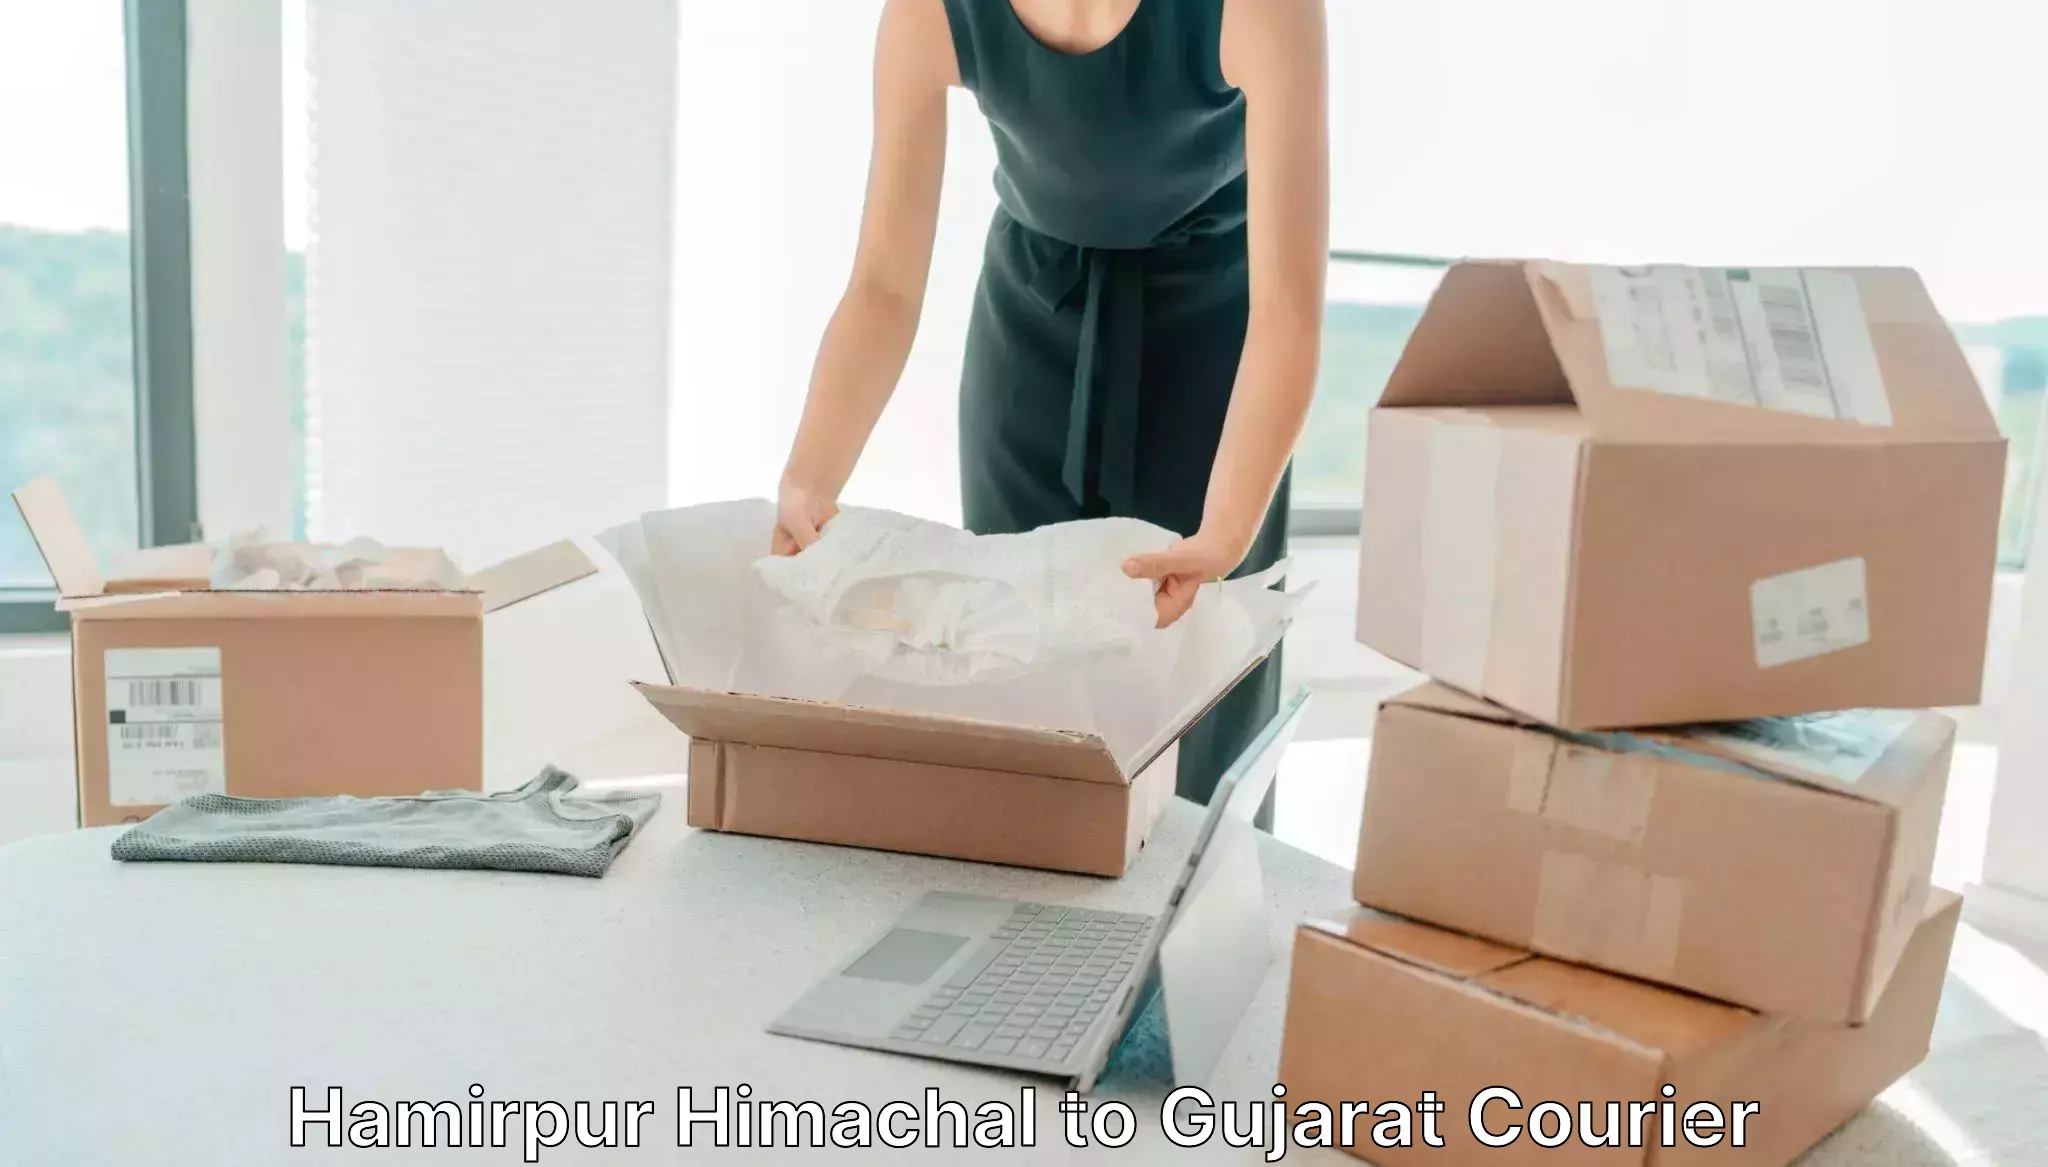 Lightweight parcel options Hamirpur Himachal to Palanpur